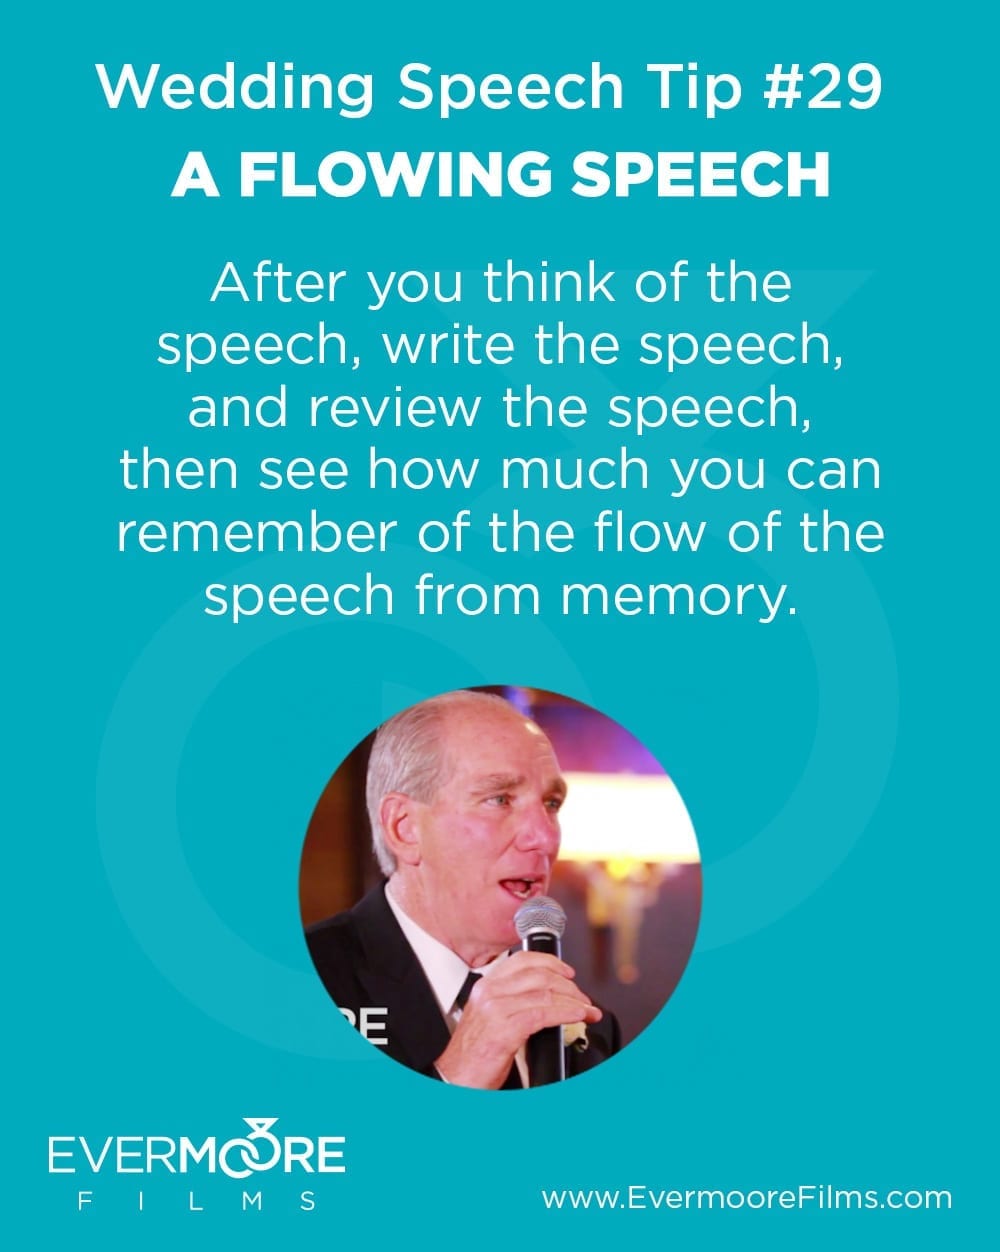 A Flowing Speech | Wedding Speech Tip #29 | After you think of the speech, write the speech, and review the speech, then see how much you can remember of the flow of the speech from memory.